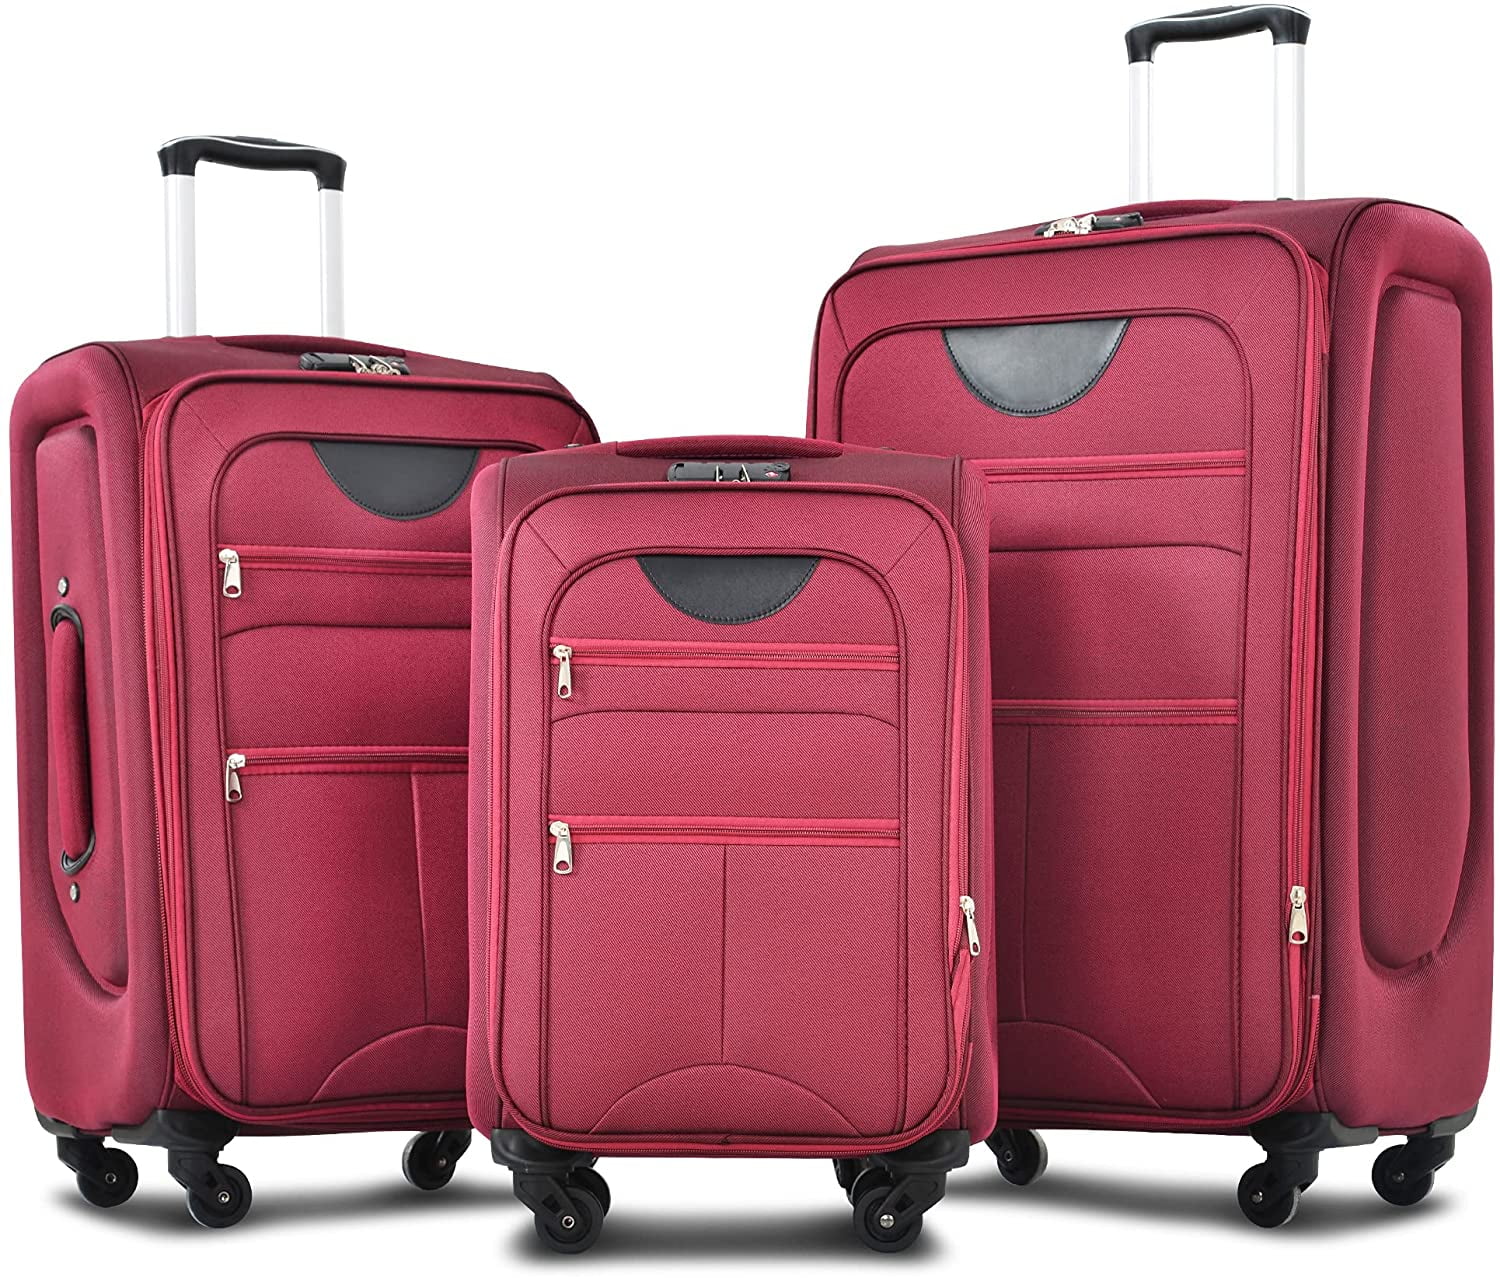 Escape With Ease: Why Samsonite